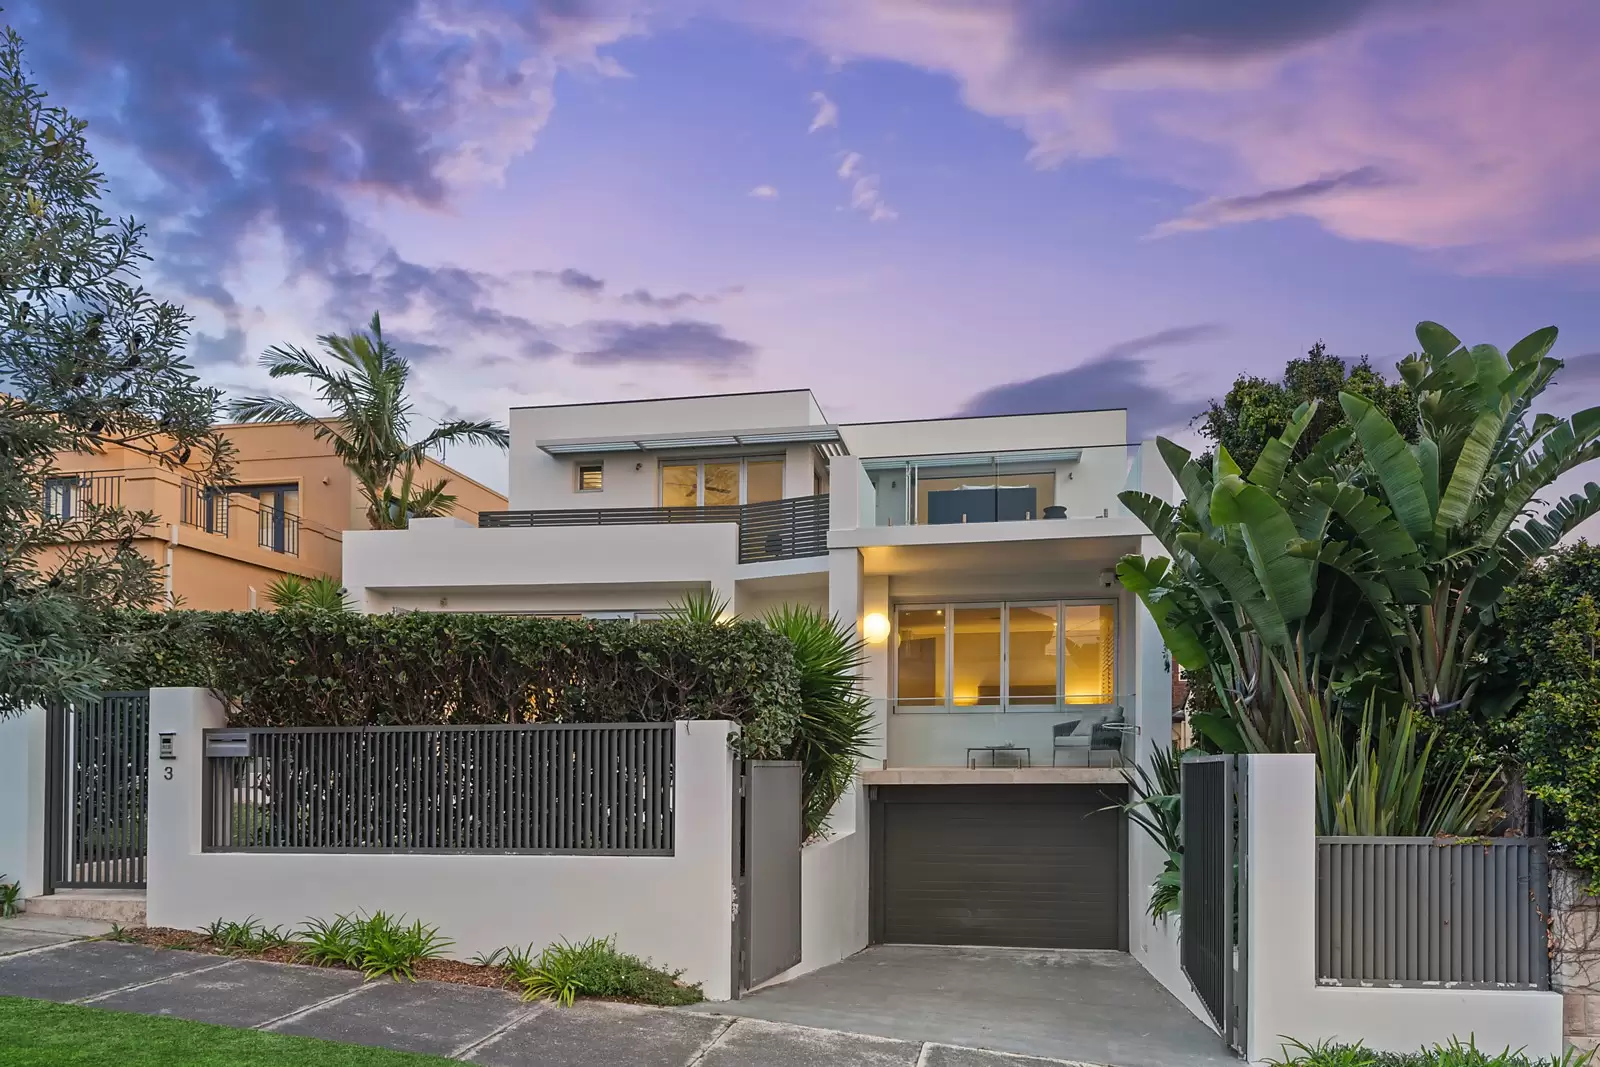 Photo #18: 3 Myall Avenue, Vaucluse - Sold by Sydney Sotheby's International Realty